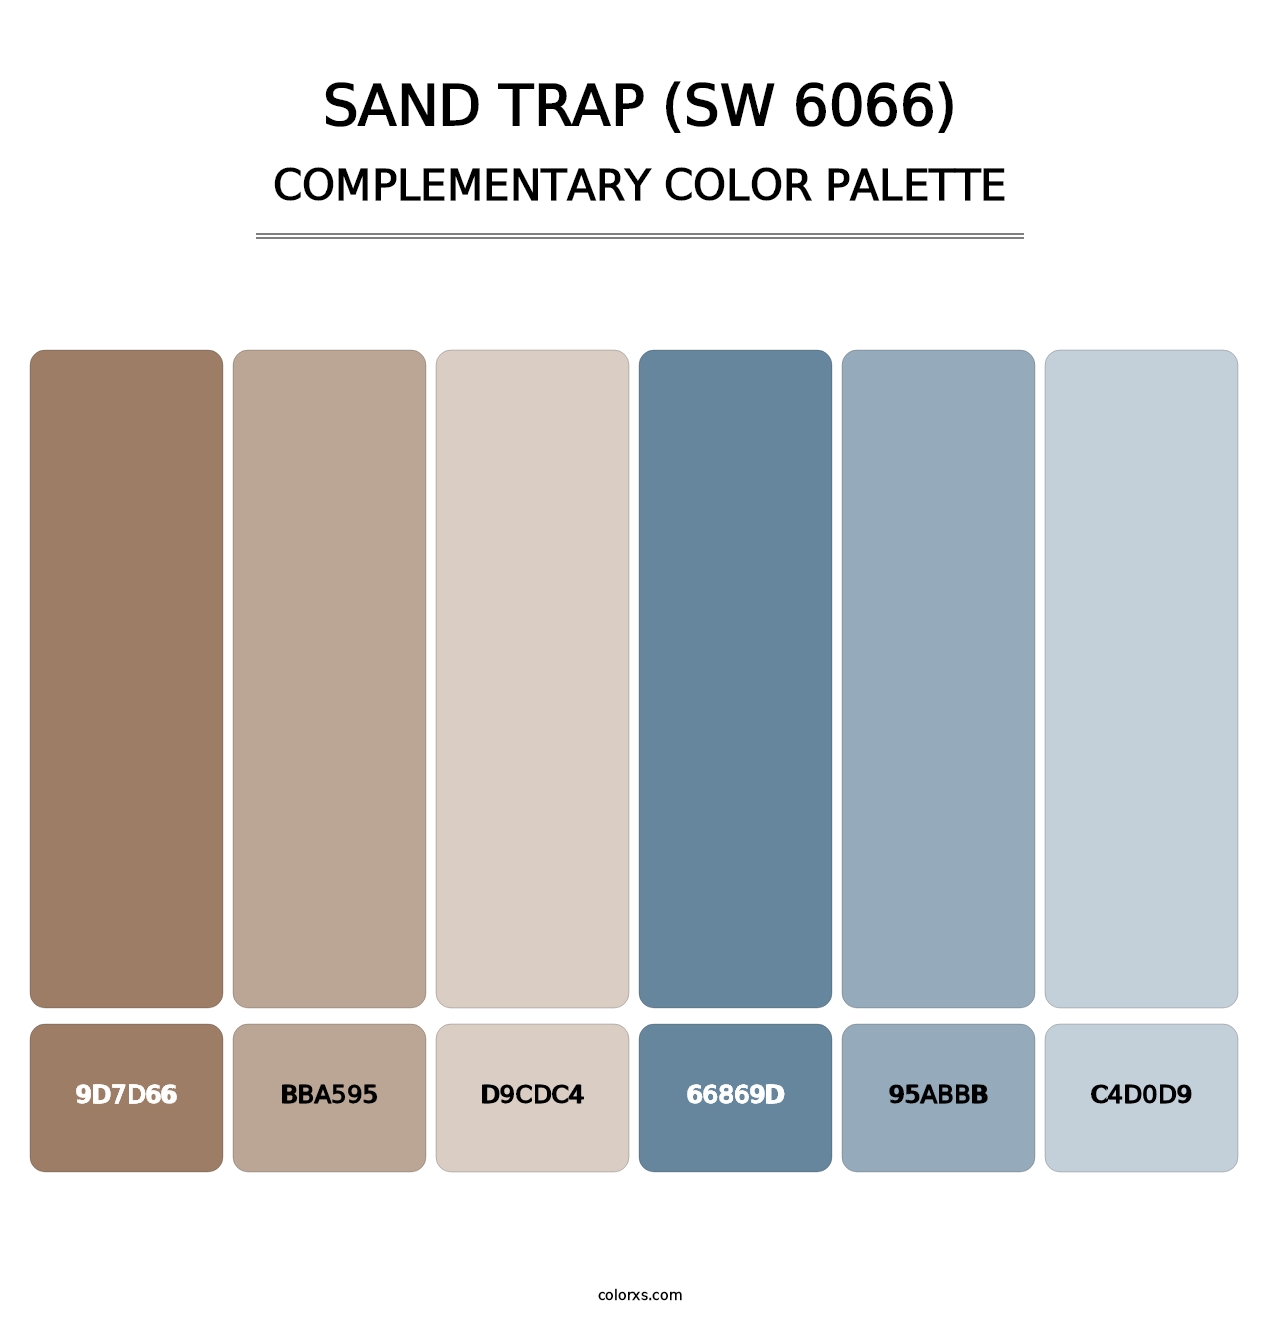 Sand Trap (SW 6066) - Complementary Color Palette